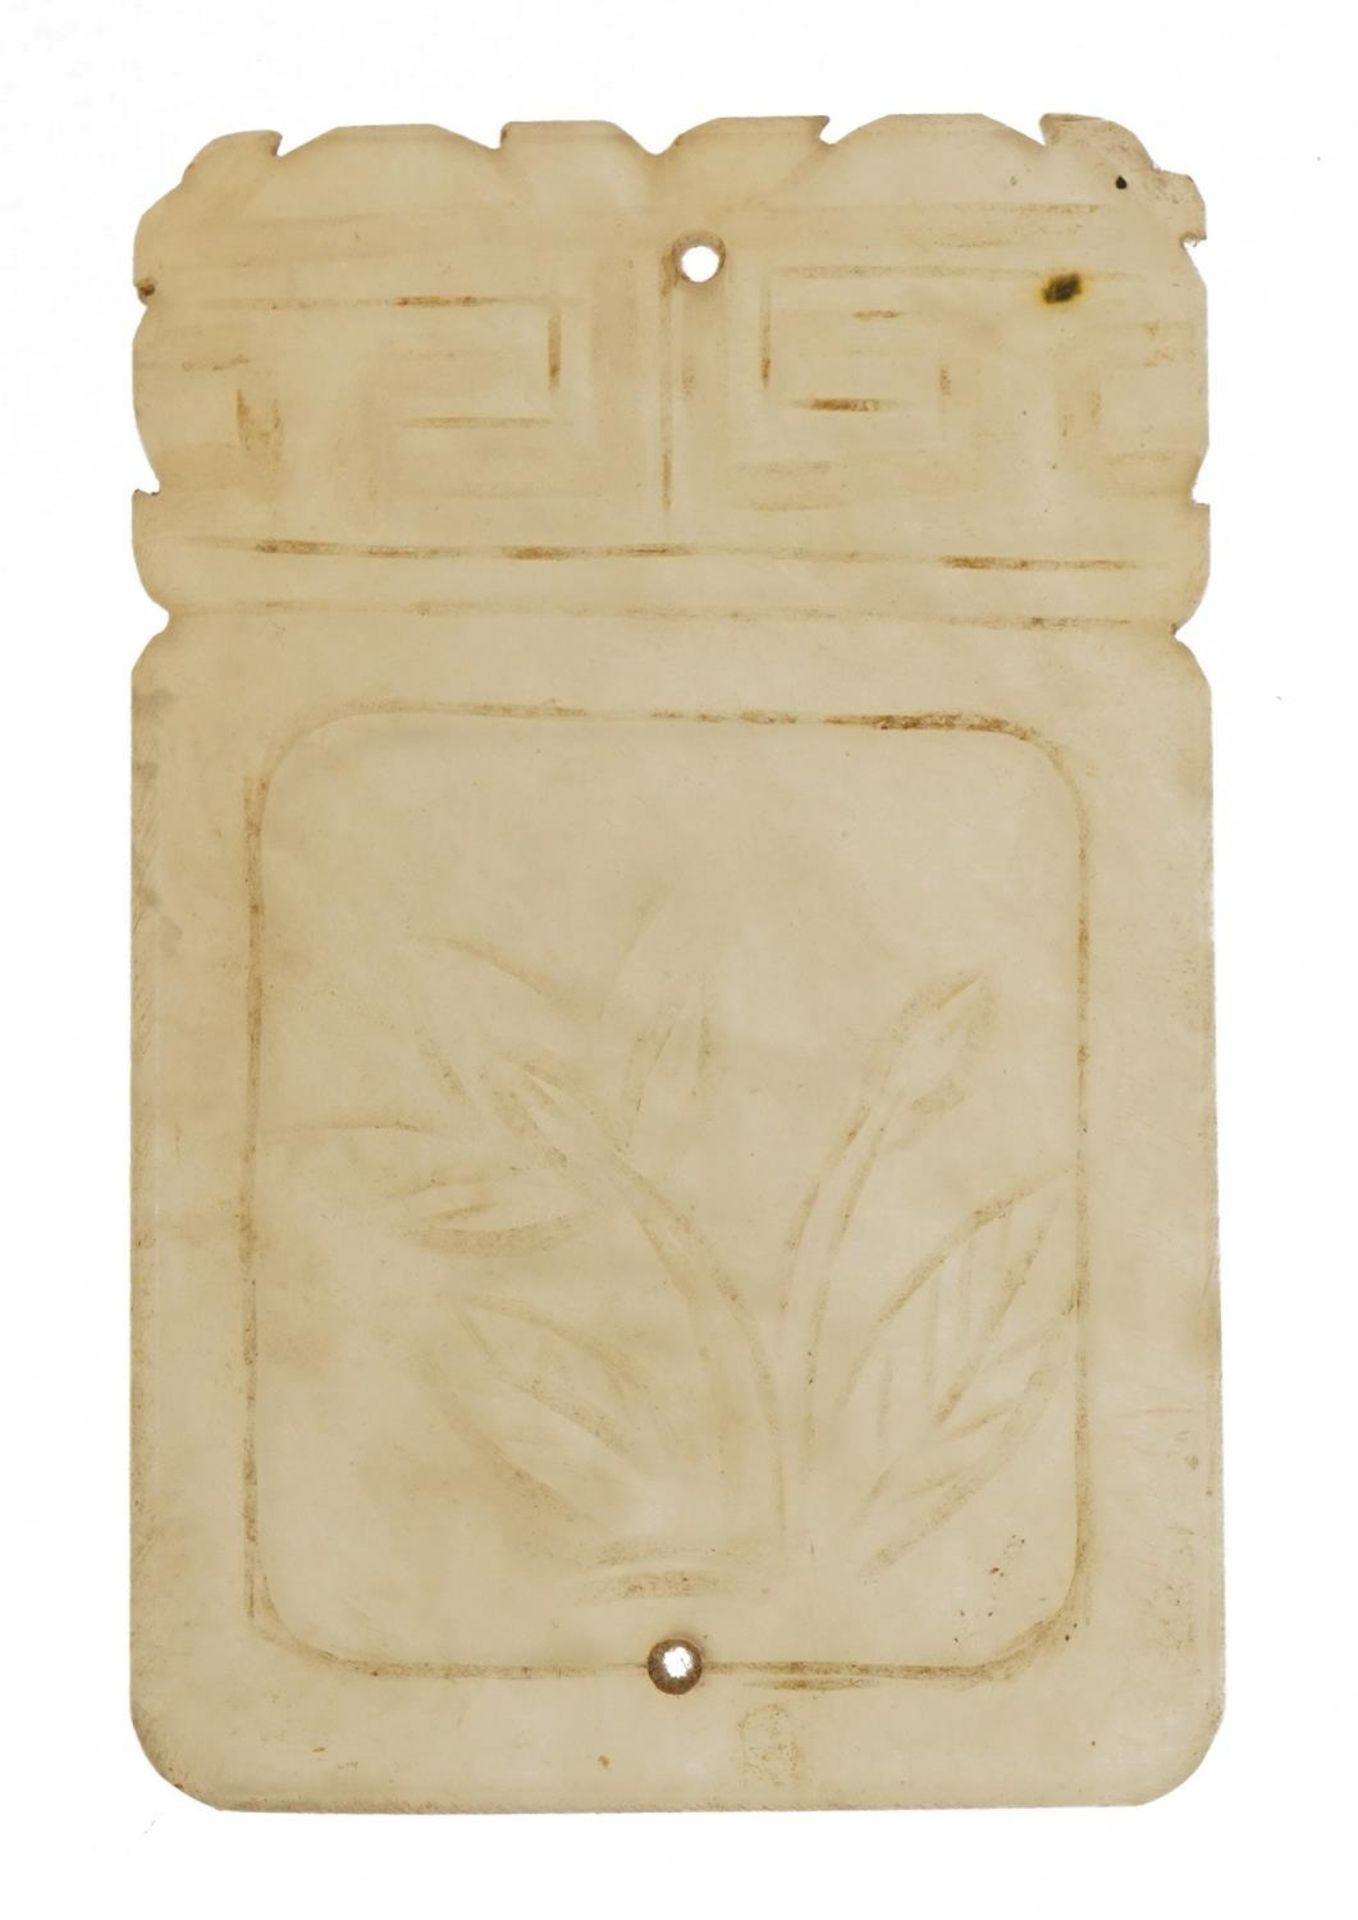 Chinese pale green jade tablet carved with flowers, 7cm x 4.5cm - Image 2 of 4